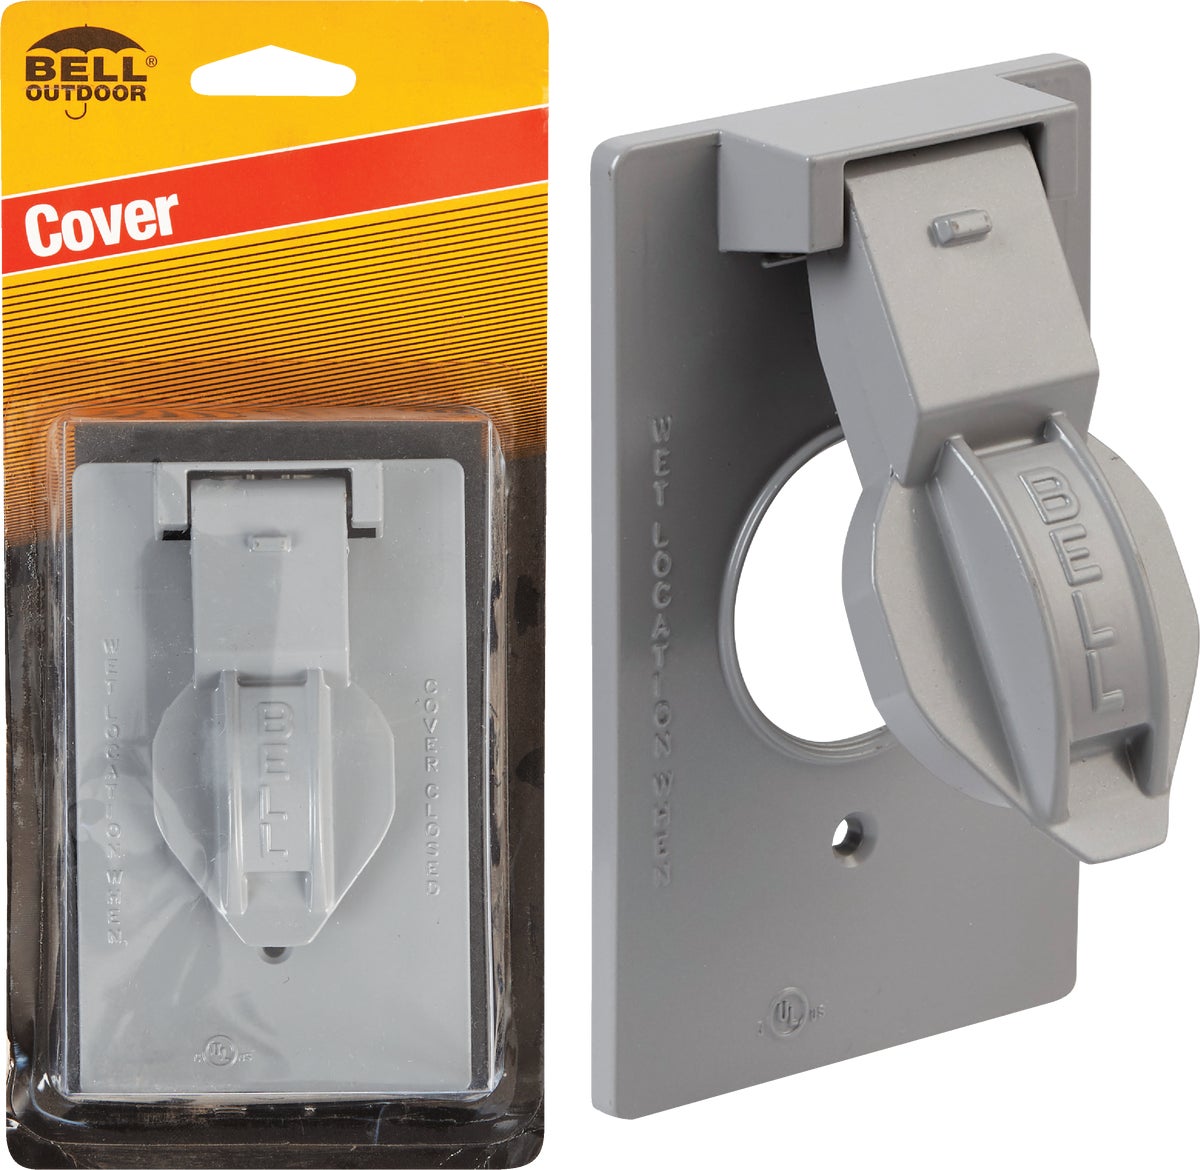 Details about   LOT OF 5 Bell DO IT BEST Aluminum Weatherproof Outdoor Box Cover 5173-5/527380 